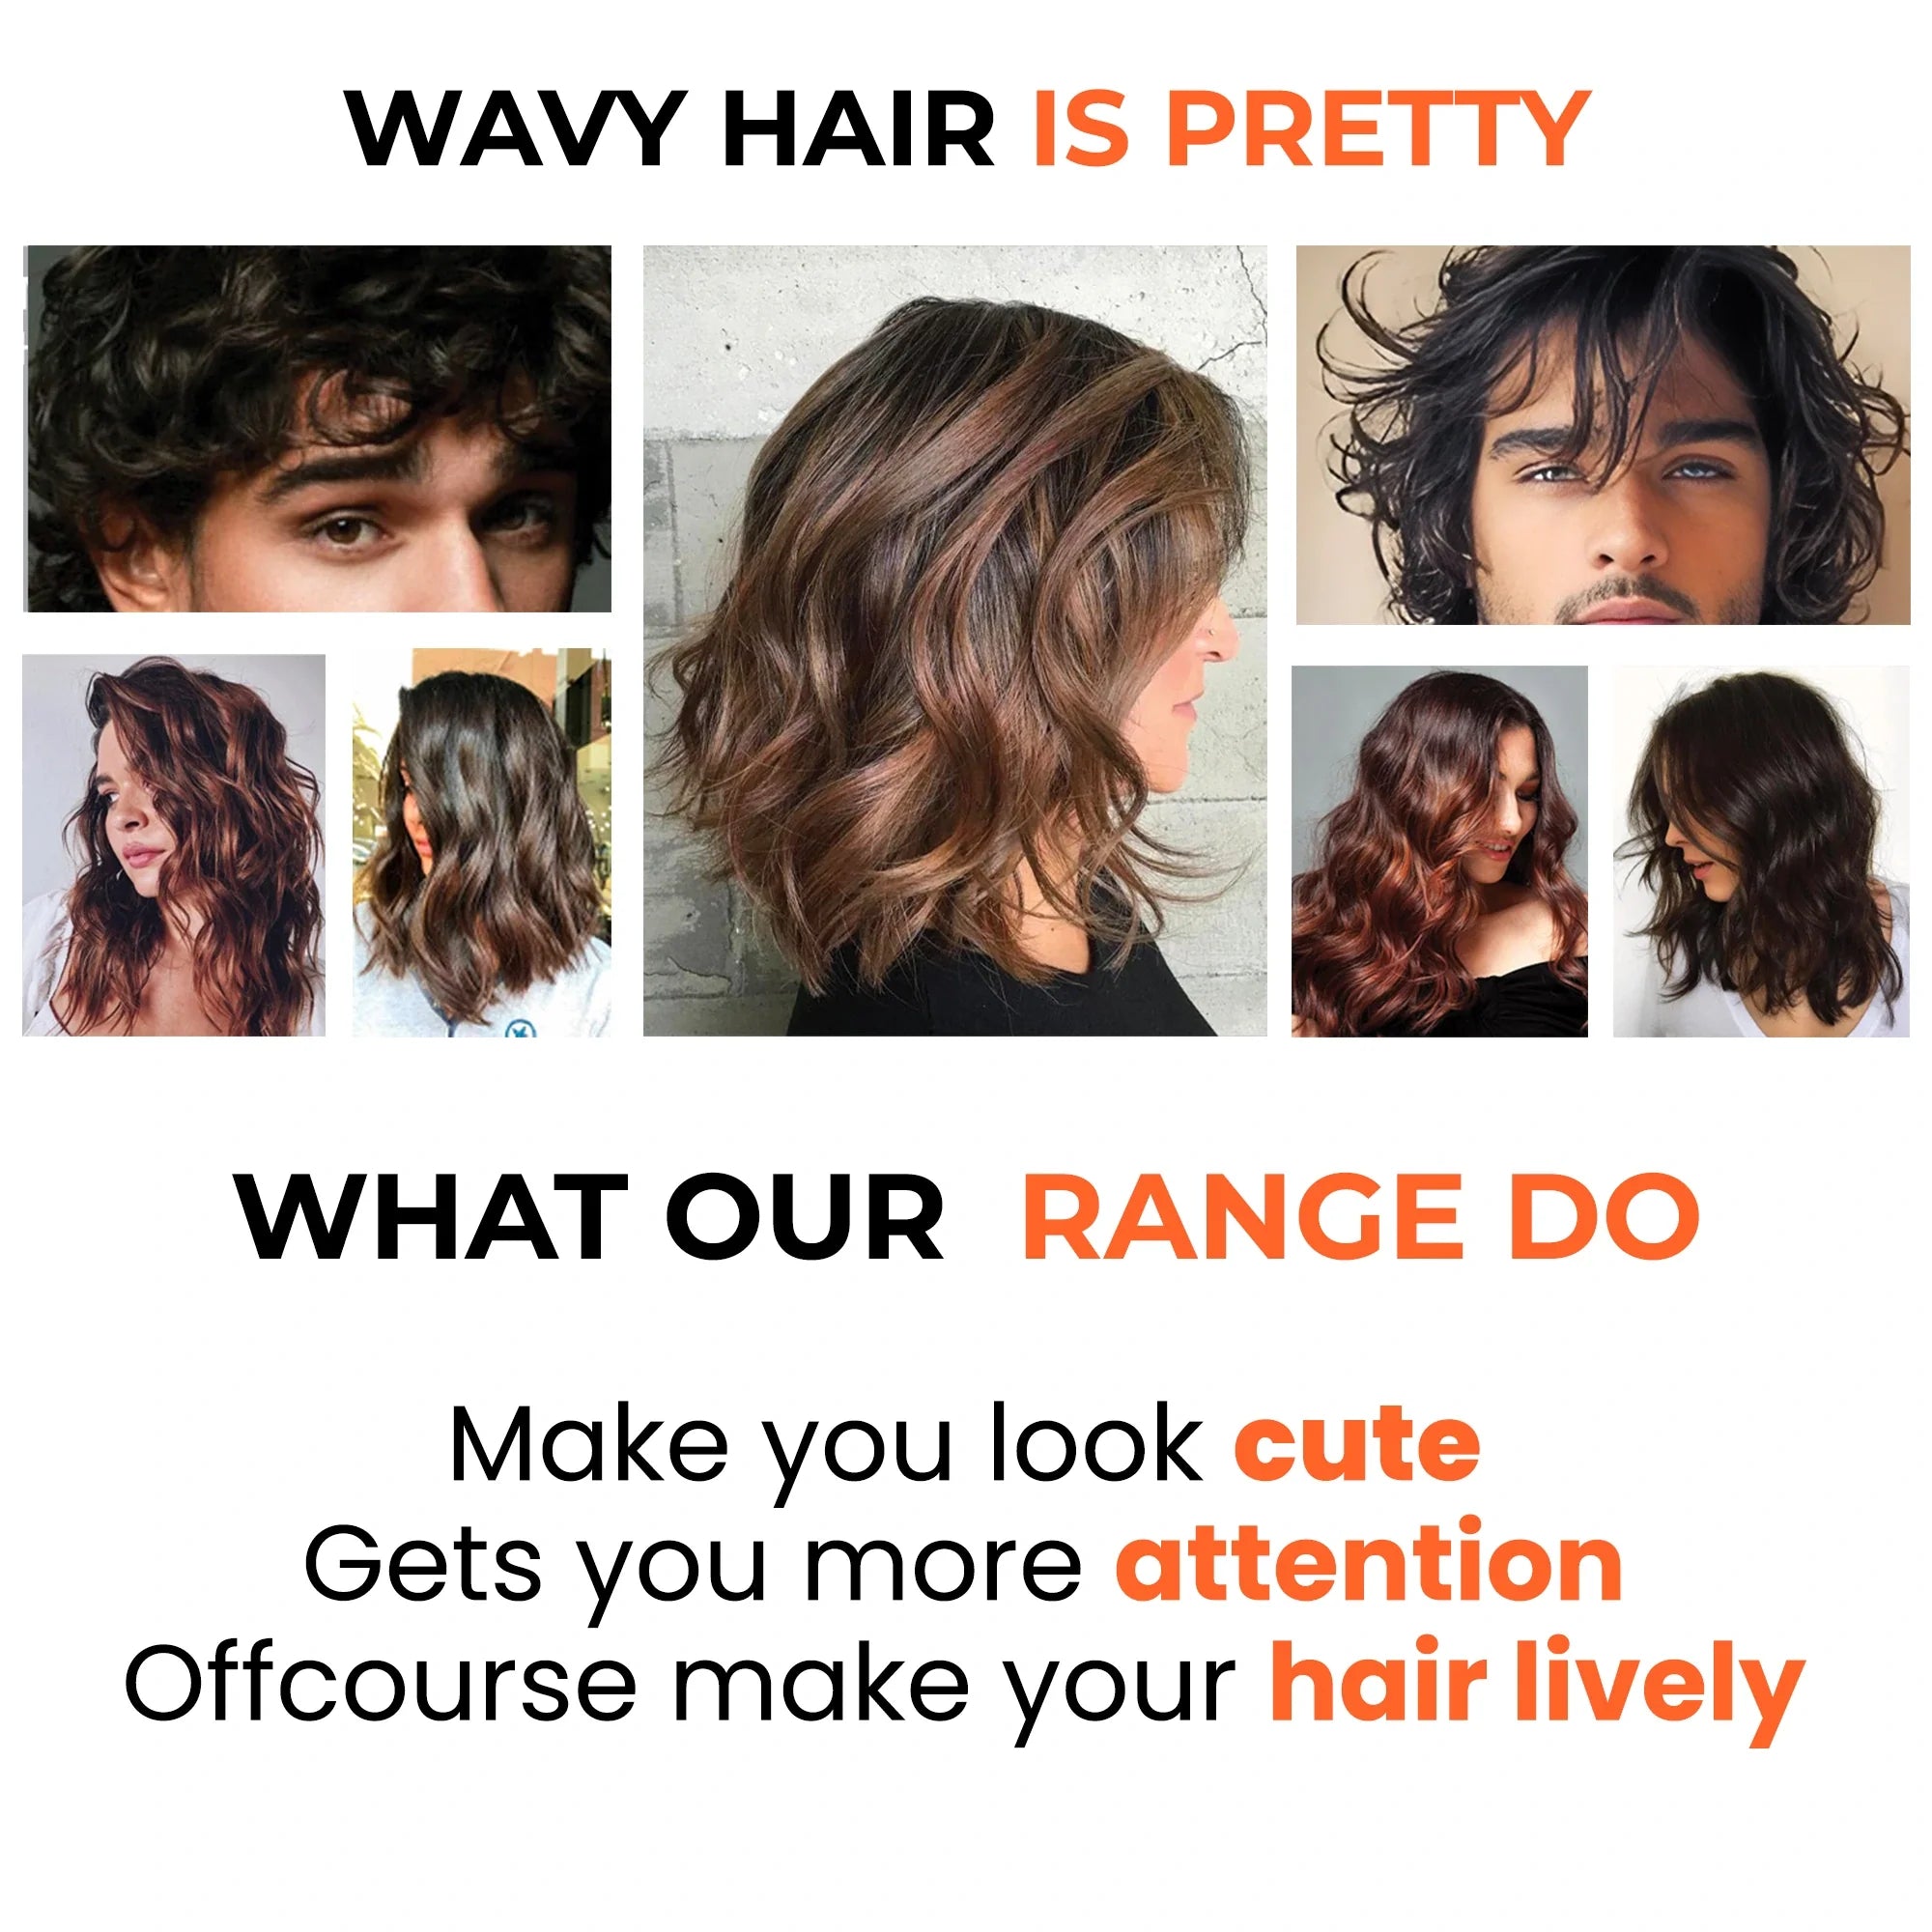 take care of your pretty wavy hair with our wavy hair care range